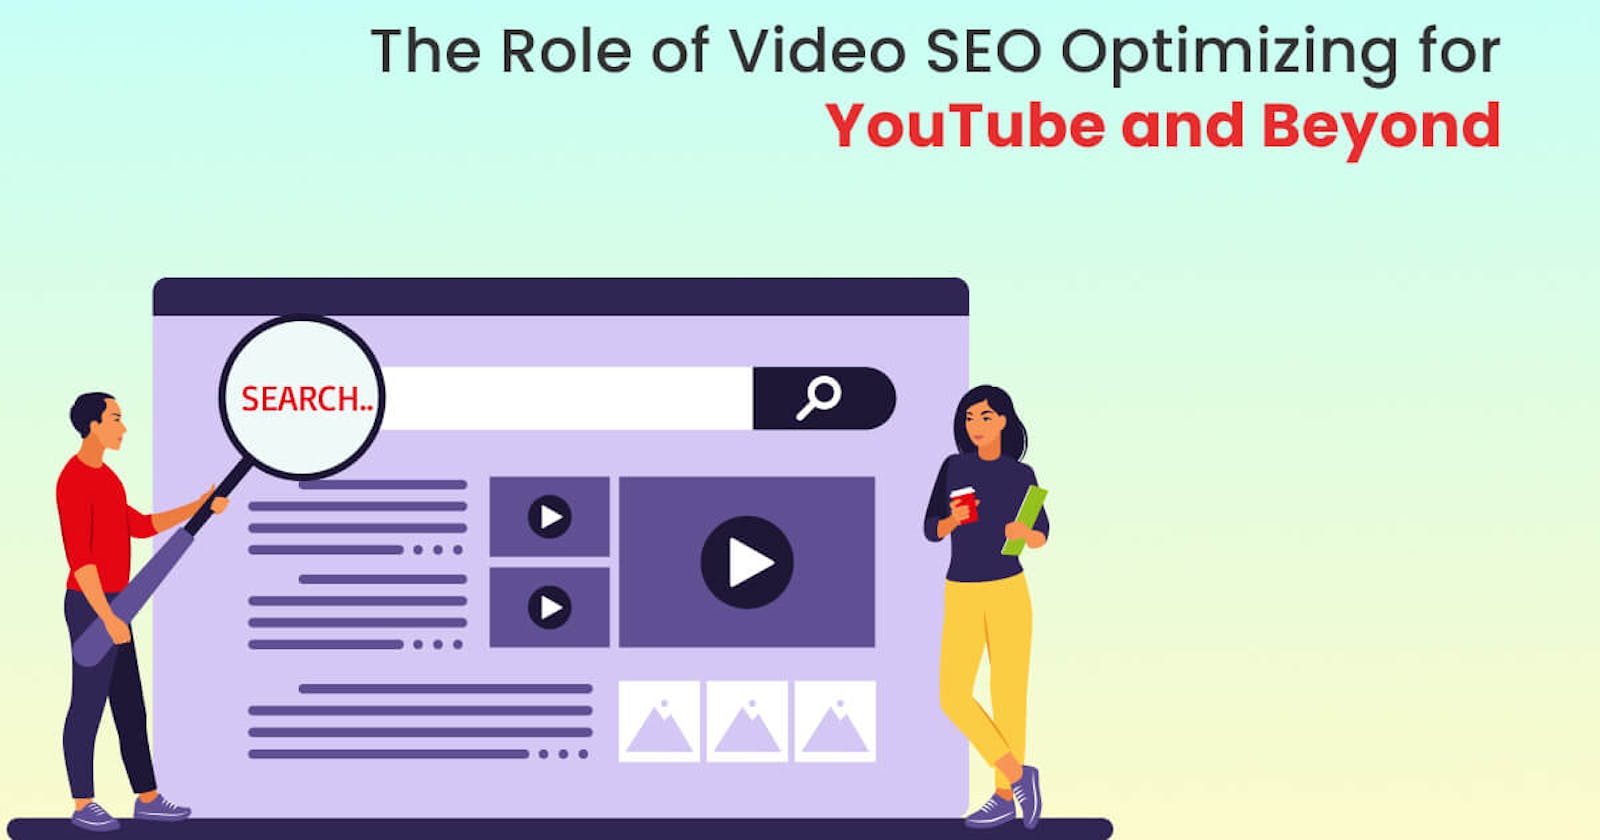 The Role of Video SEO: Optimizing for YouTube and Beyond